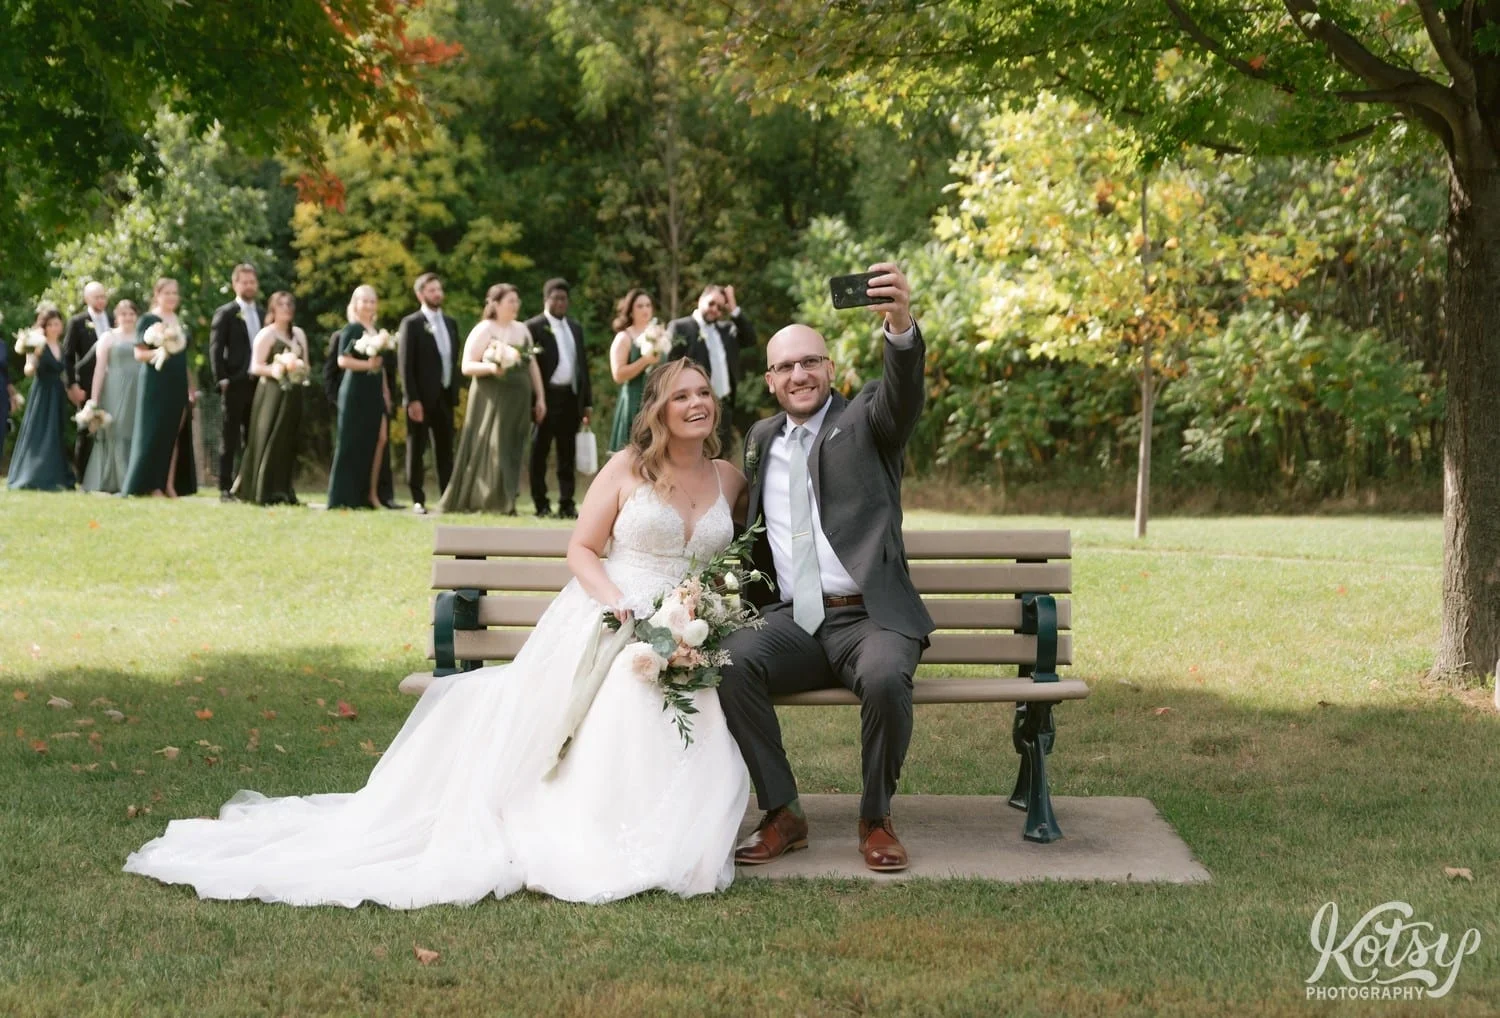 A groom wearing a gray suit and green tie holds a phone to take a selfie with his bride wearing a white bridal gown and holding a flower bouquet on a park bench while their wedding party walks behind them on a path at West Deane Park in Toronto, Canada